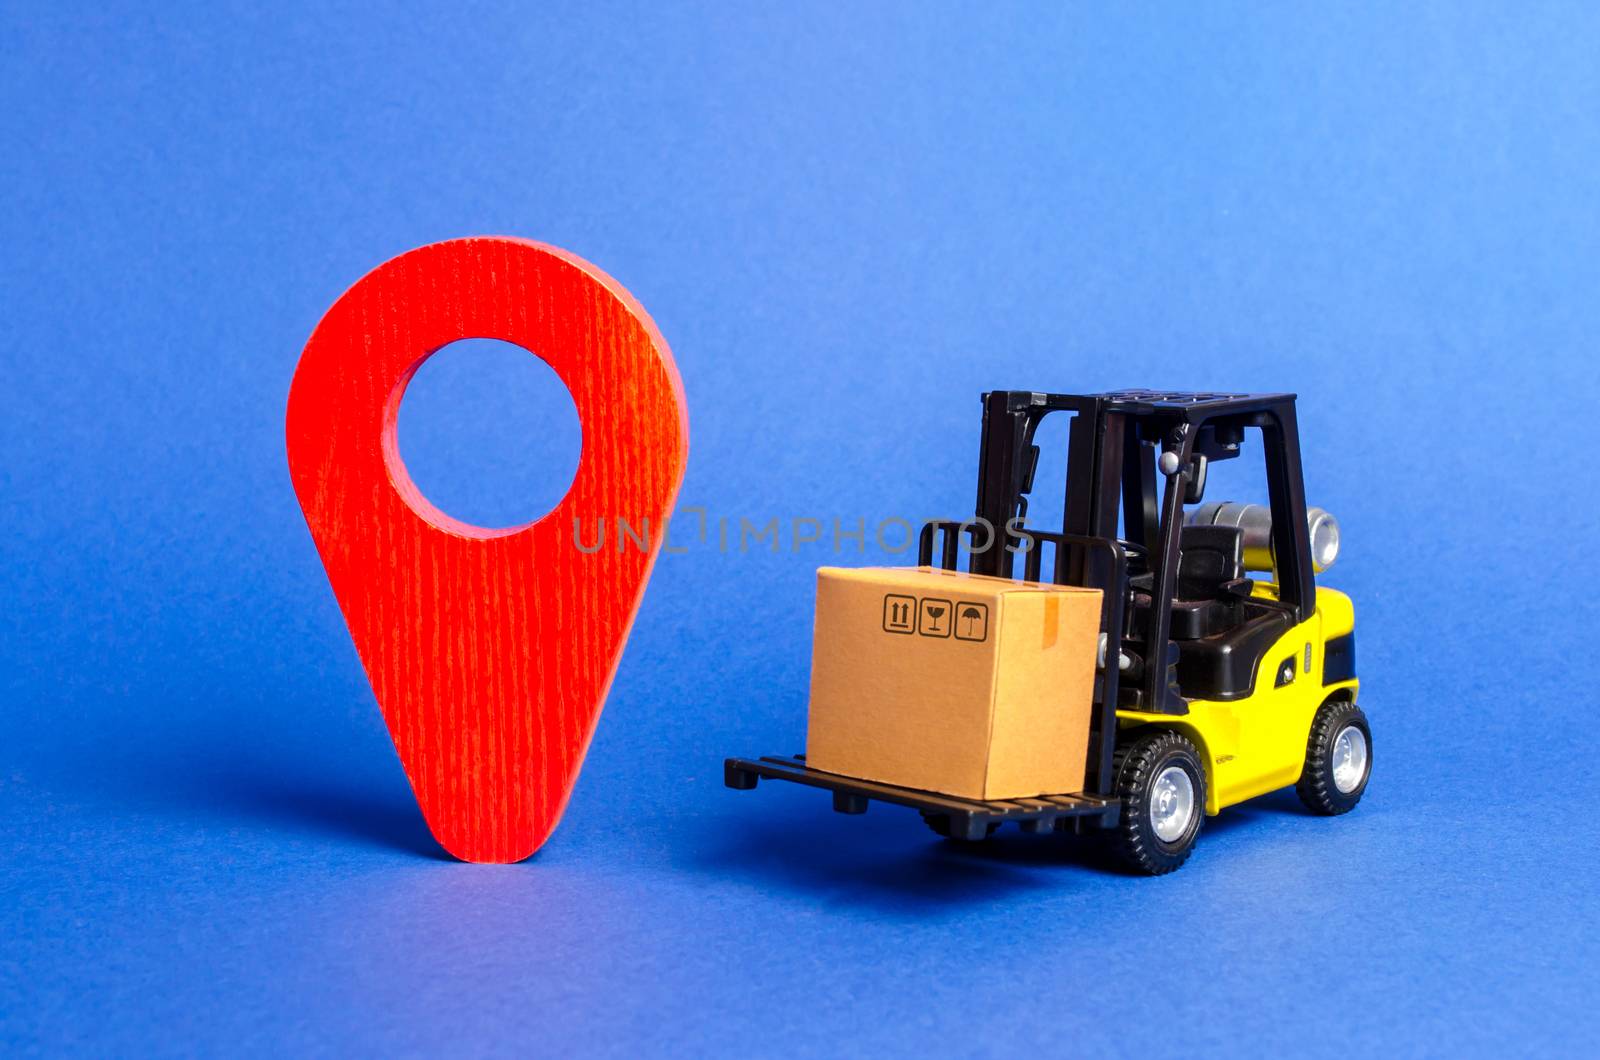 Yellow Forklift truck carries a box next to red pointer location. Services transportation of goods, products, logistics and infrastructure. Transportation company. Location of carriers tracking